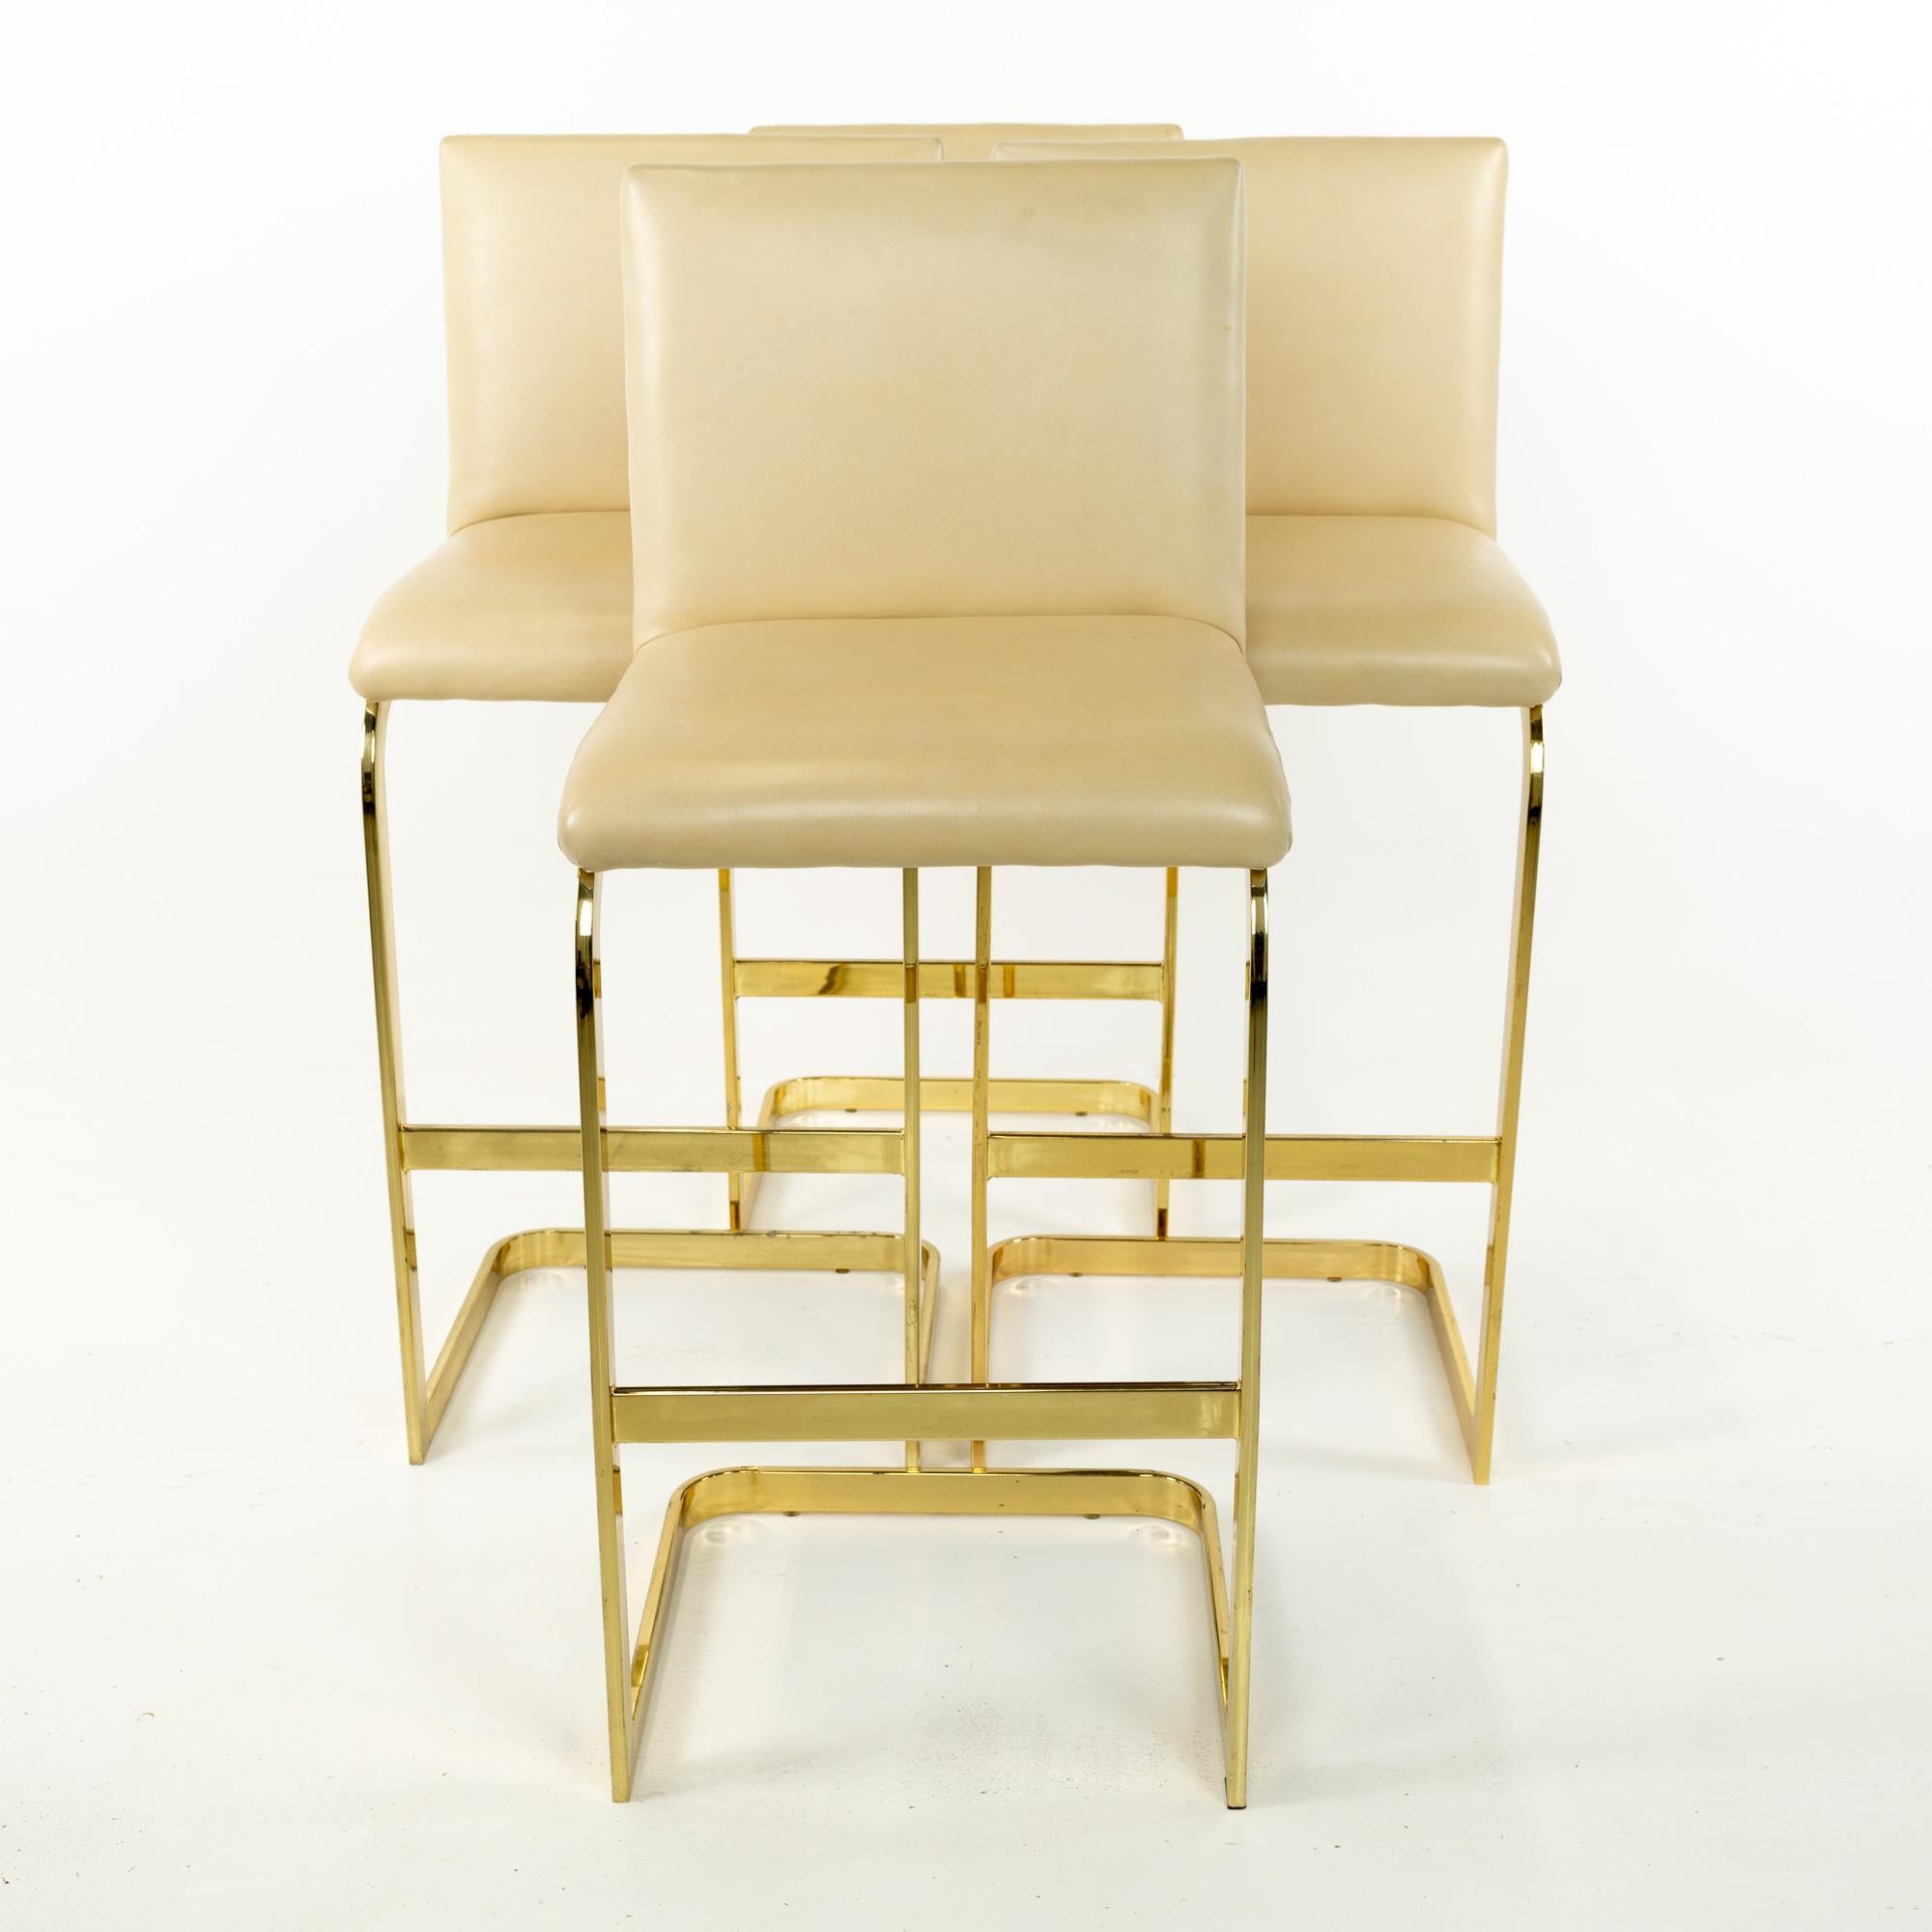 Milo Baughman style Mid Century brass and cream upholstered cantilever bar stools, set of 4
These chairs are 18.5 wide x 17.75 deep x 43 inches high, the seat height is 30 inches

This piece is available in what we call restored vintage condition.